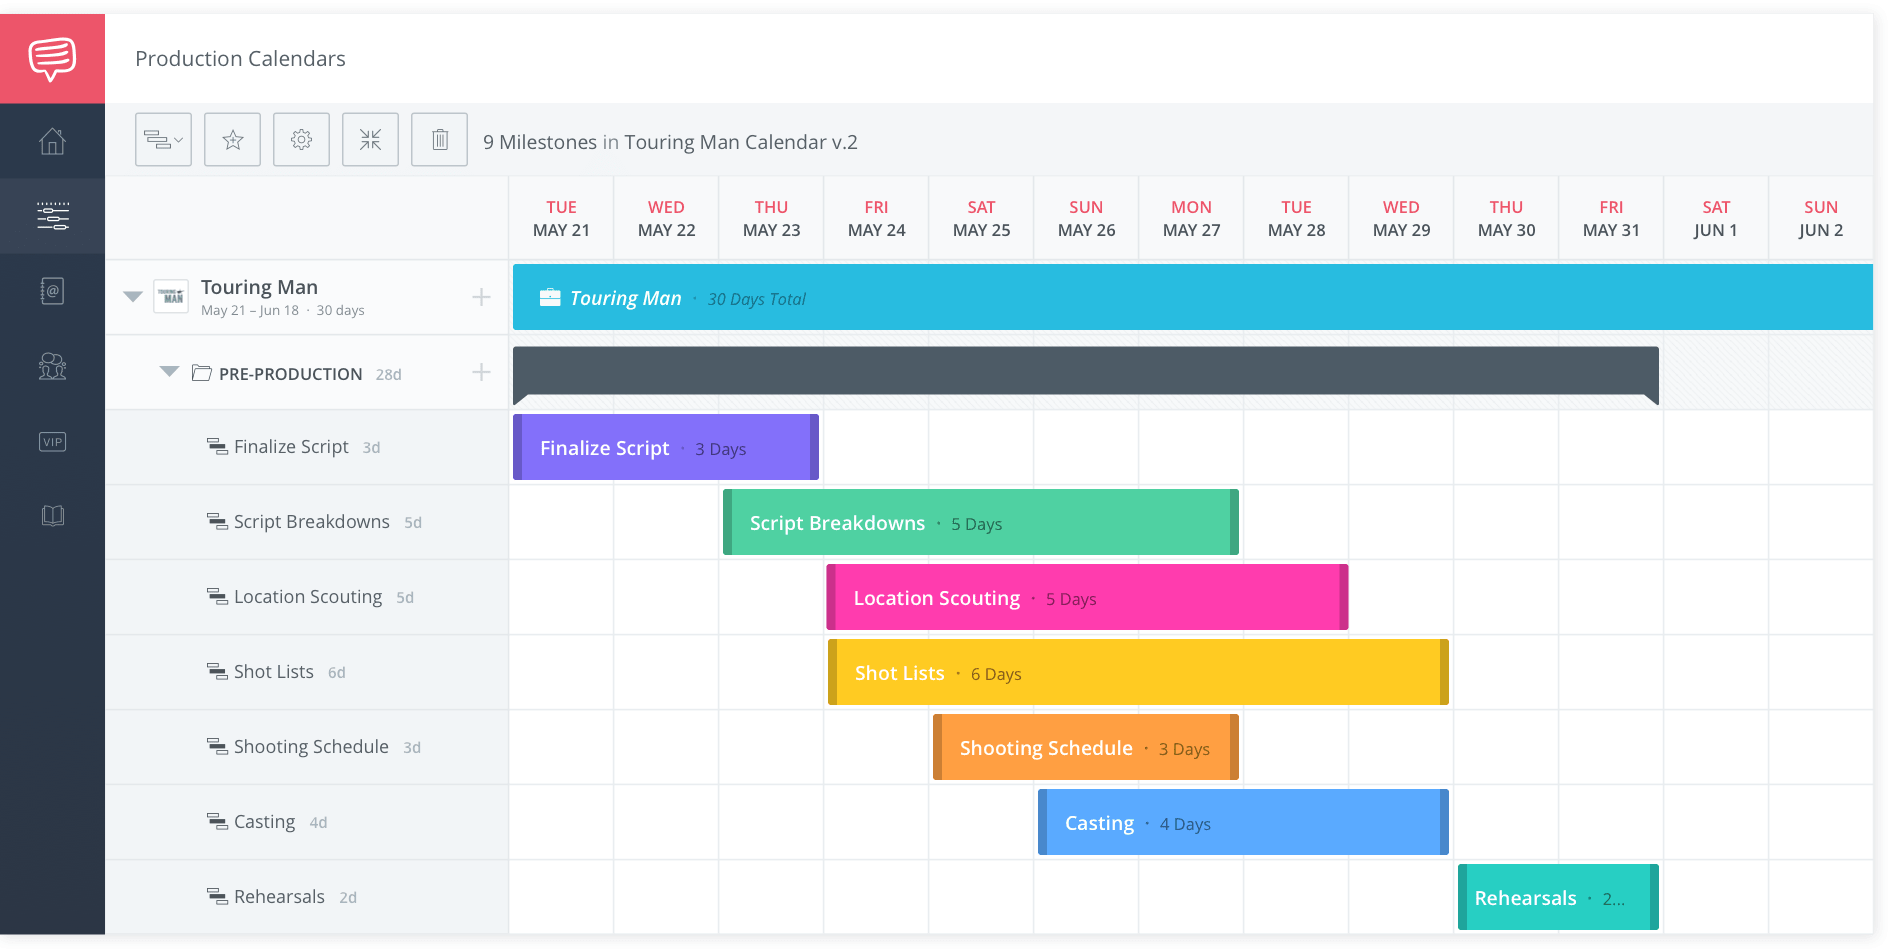 The Ultimate Guide to an Effective Production Calendar - Pre-Production